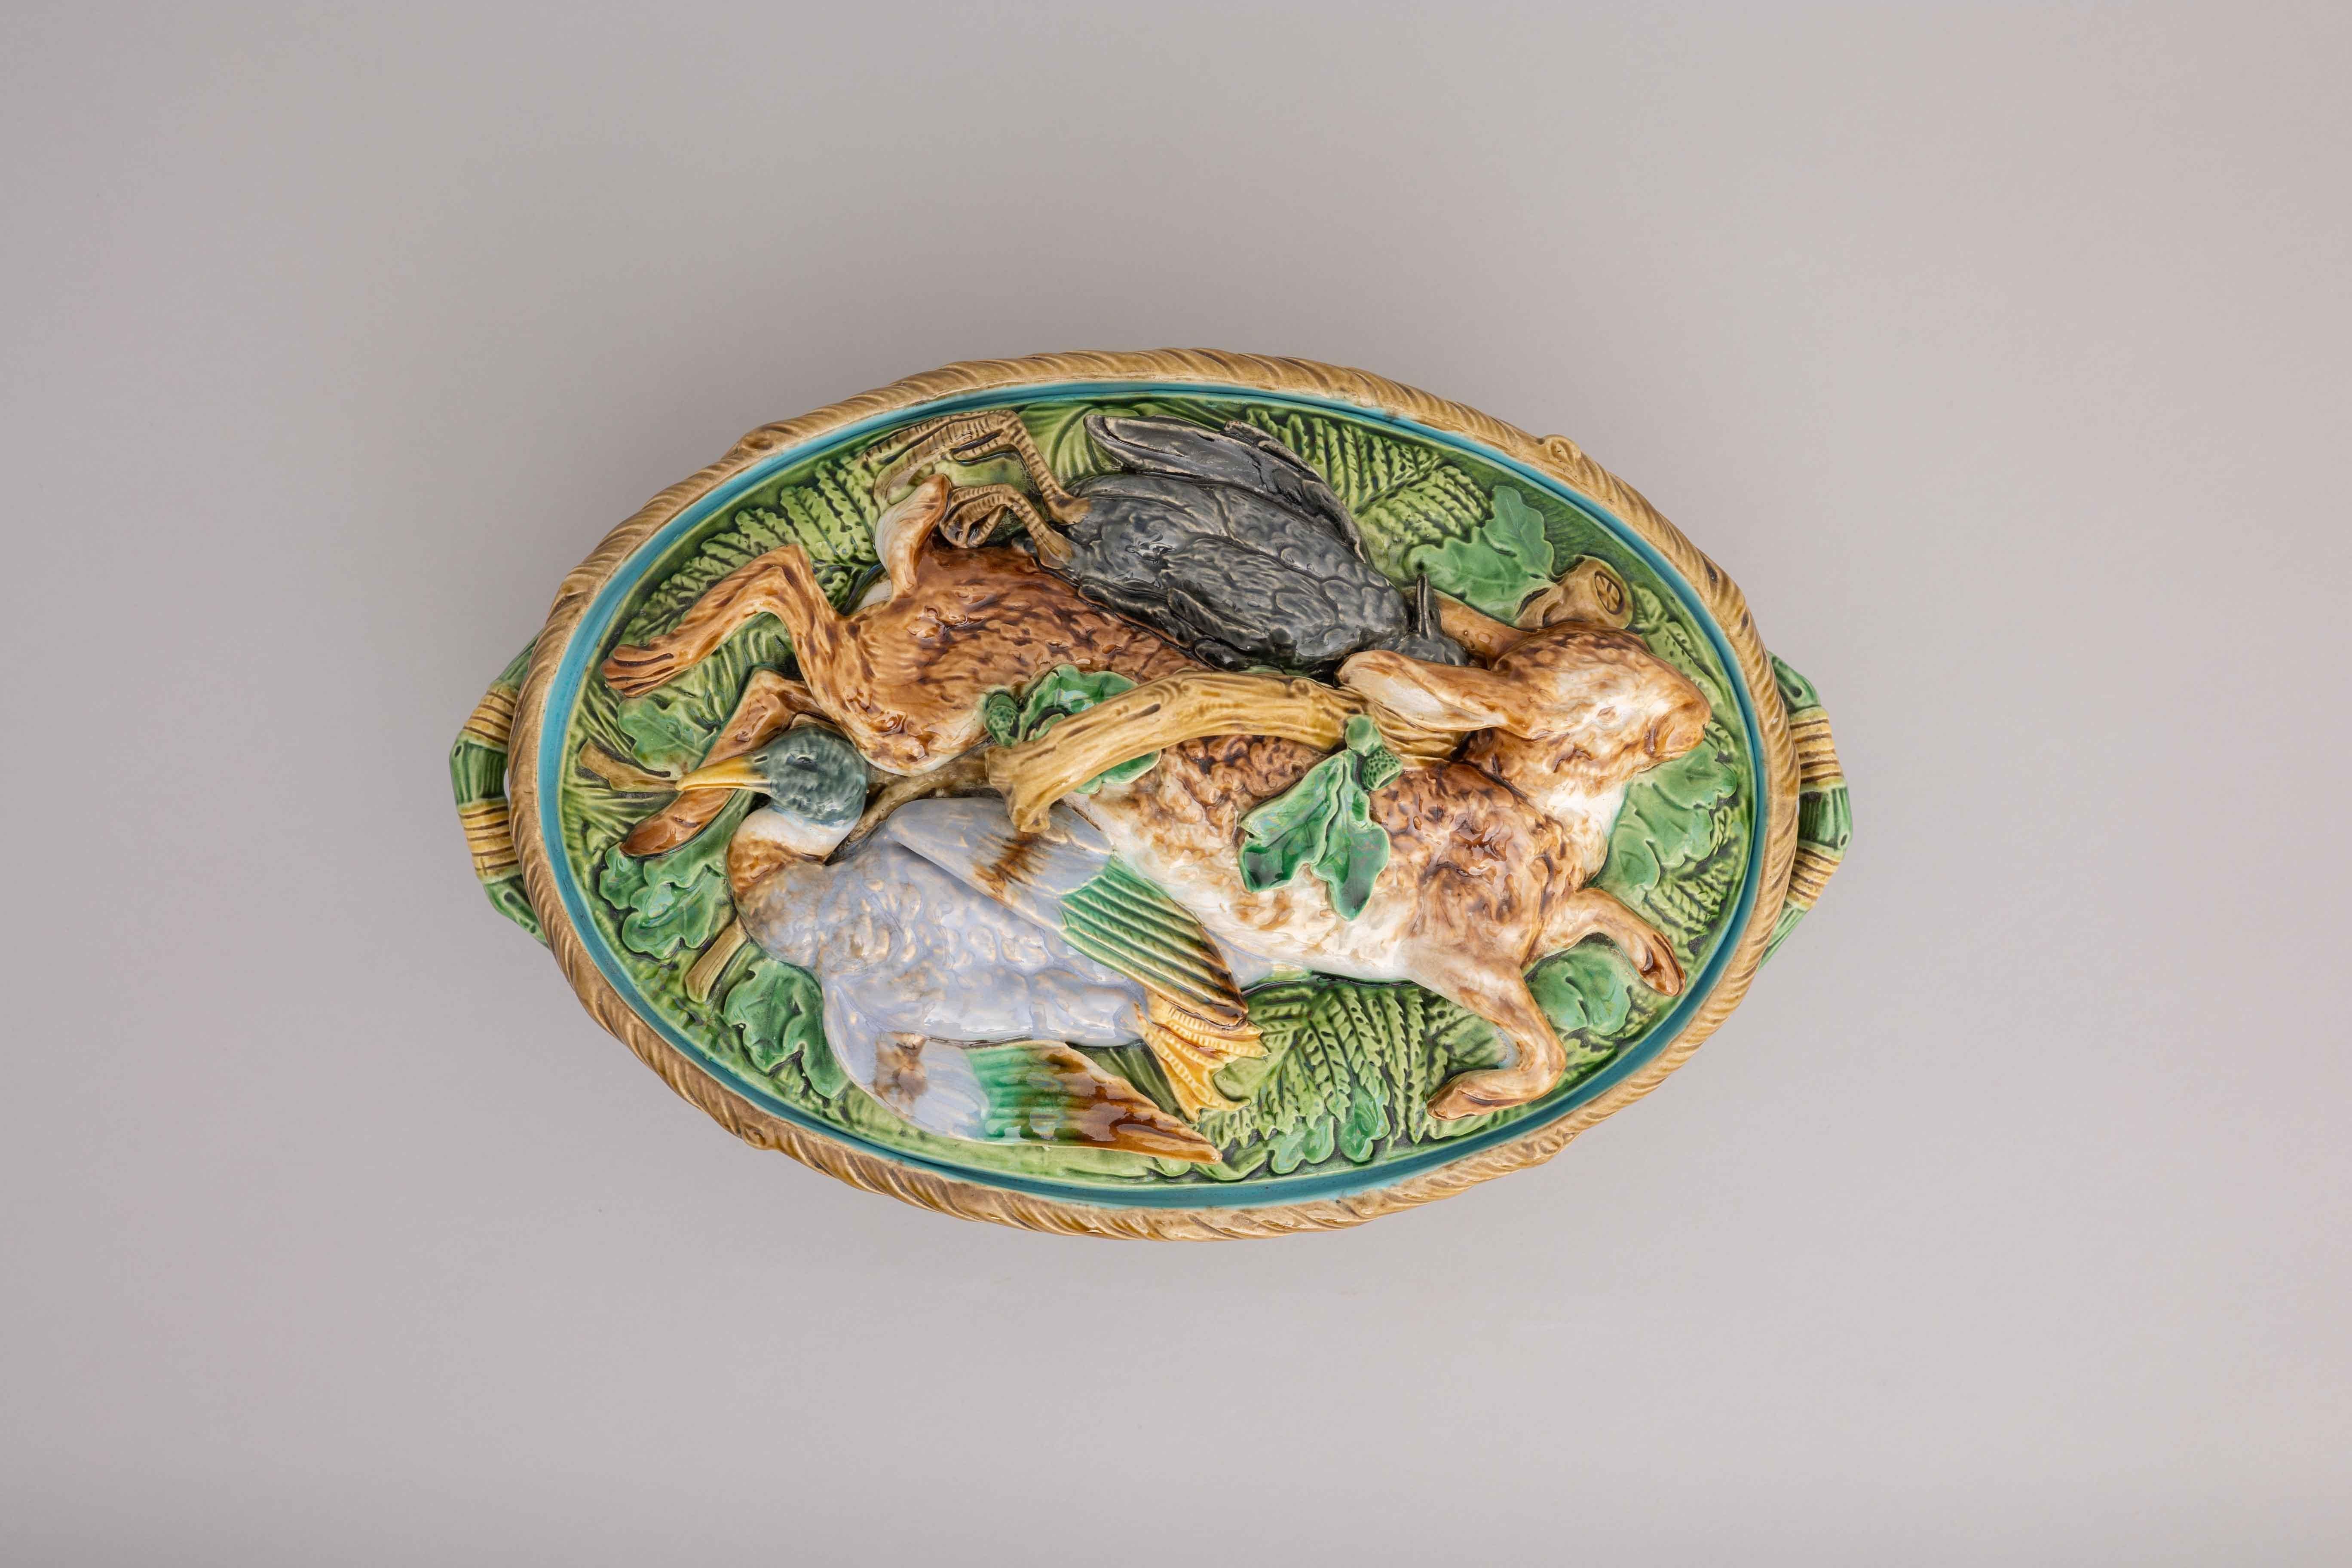 Glazed English Victorian Majolica Game Pie Dish Made by Minton & Co. For Sale